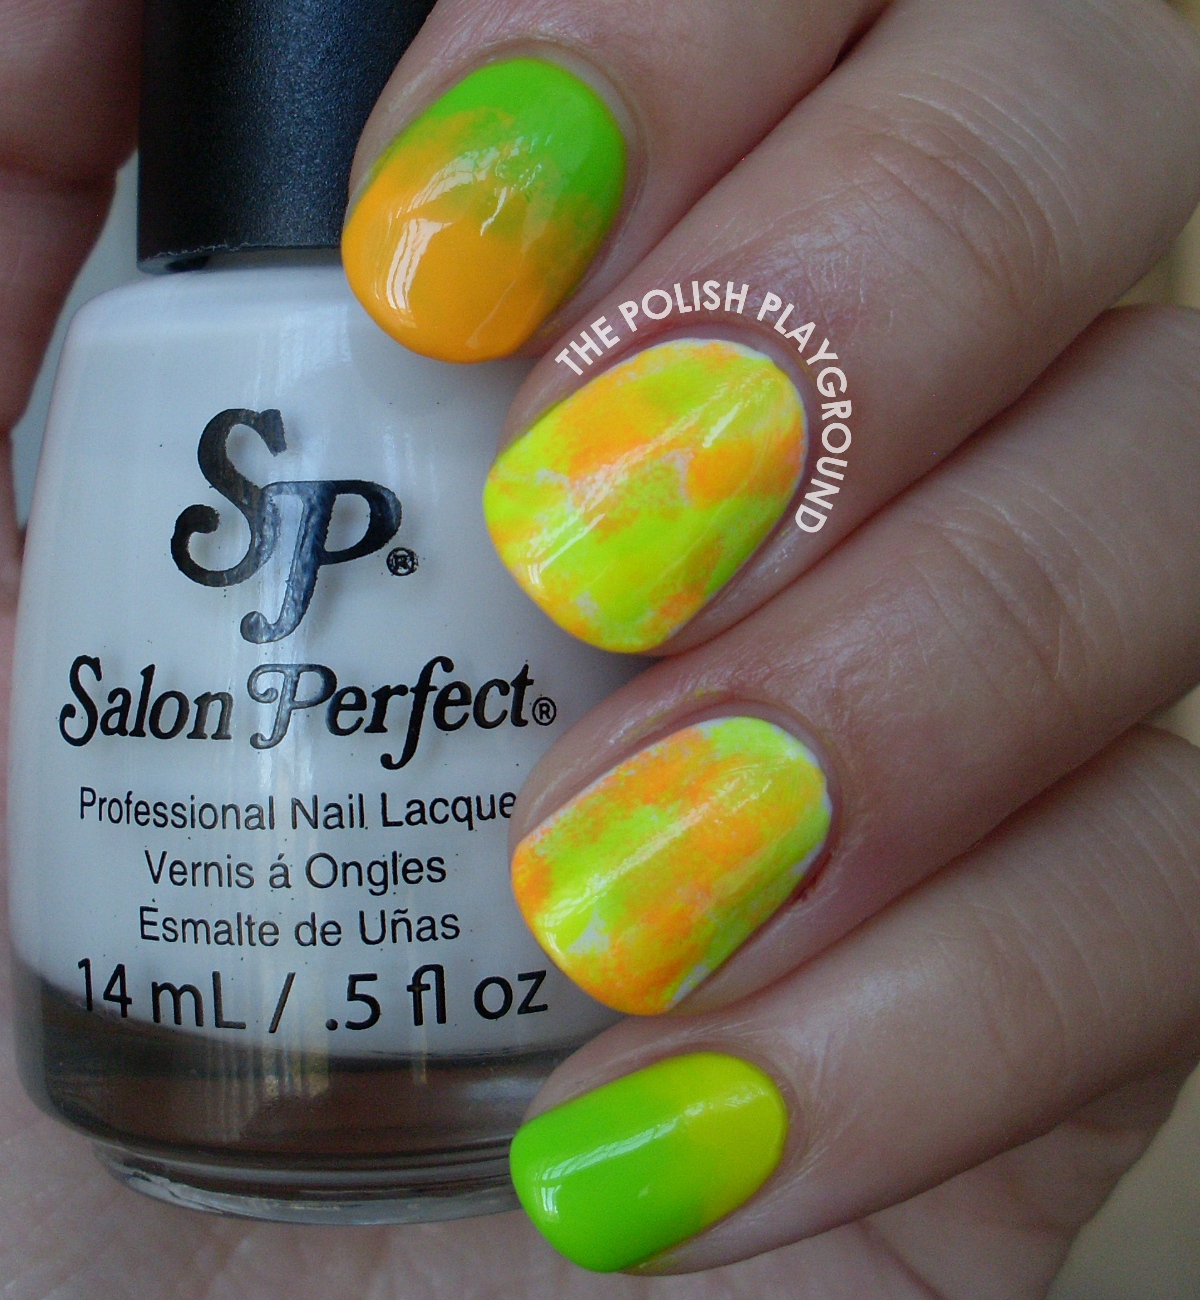 Neon Sponging and Gradient Nail Art